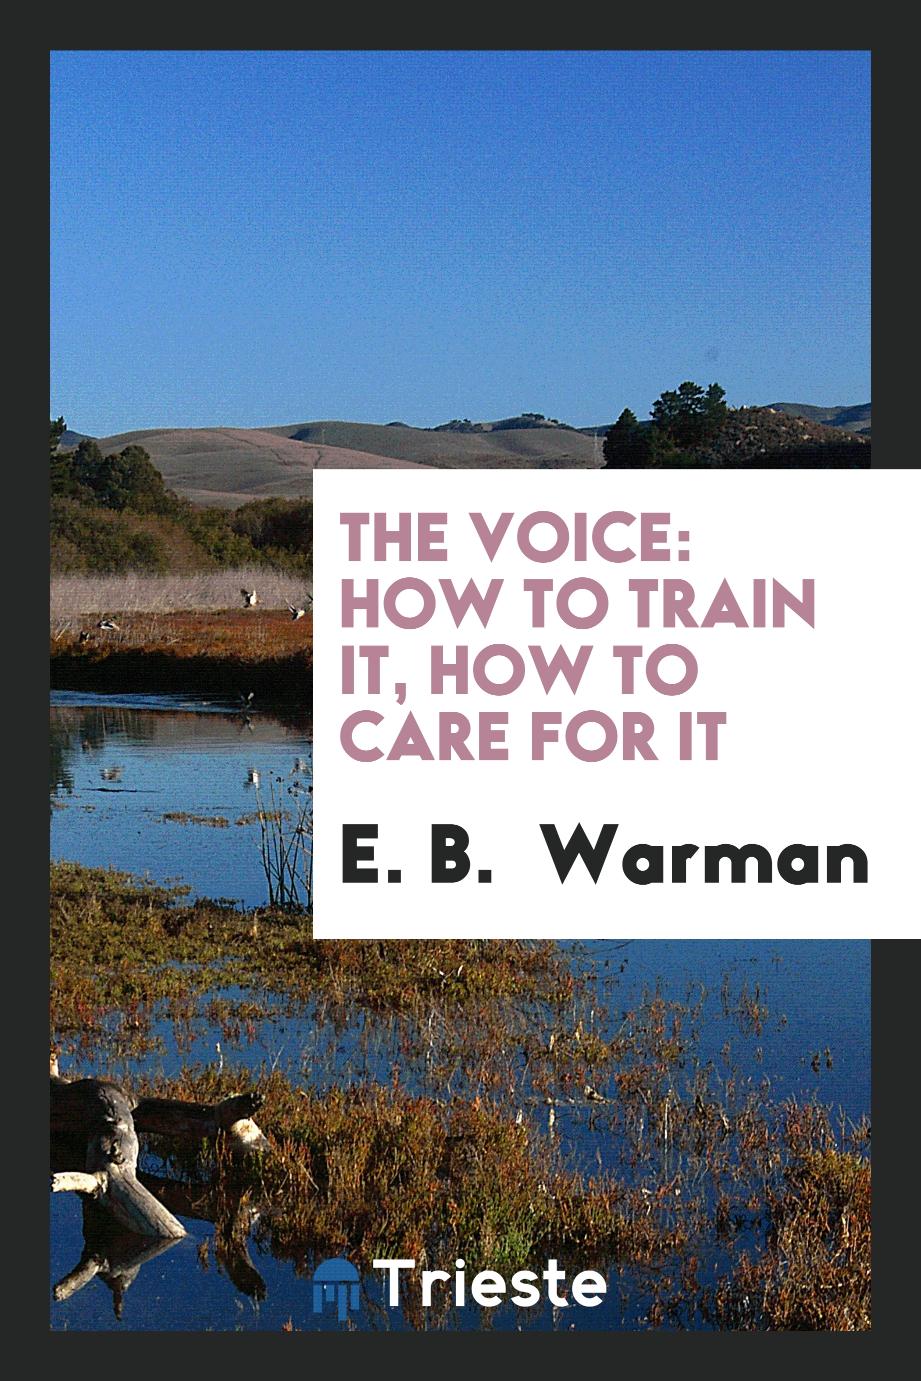 The Voice: How to Train It, How to Care for It